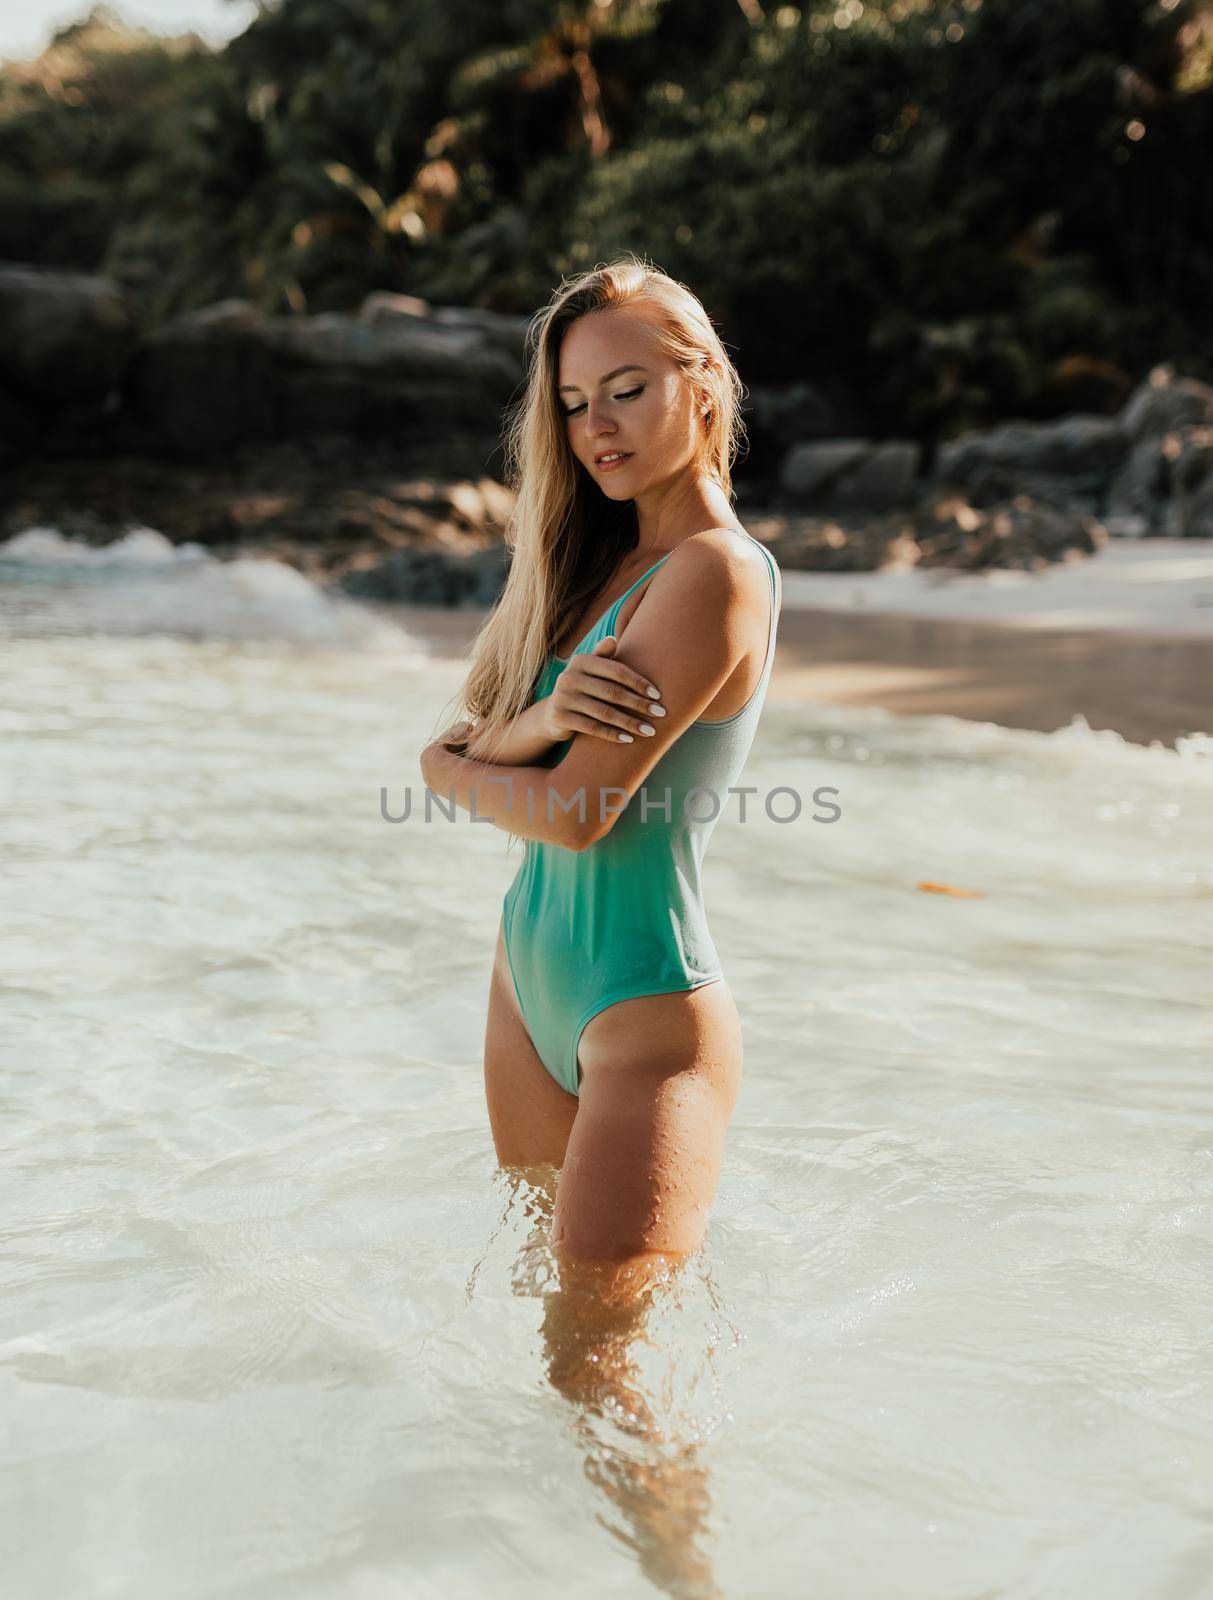 blonde young European woman in bikini swimsuit standing in ocean water, sea on background stone rocks and palms tree